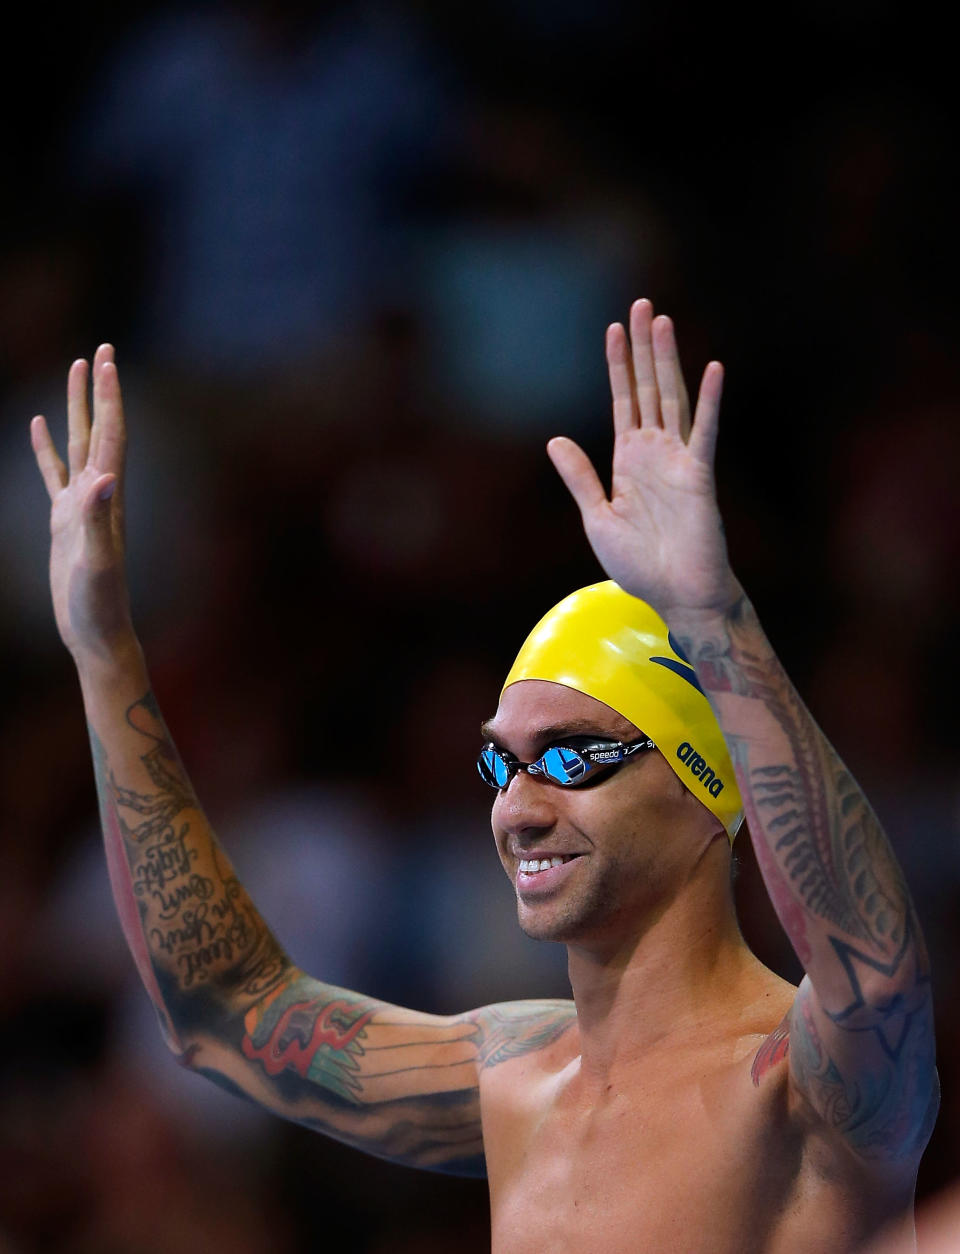 Swimmer Anthony Ervin won a gold medal in the 50-meter freestyle at the 2000 Summer Olympics, and then retired in 2003 at the age of 22. He started training again last year for an Olympic comeback, and that journey culminated at the Olympic Trials, where he finished second in the 50 free in 21.60 seconds to qualify for the London Games. (Photo by Jamie Squire/Getty Images)